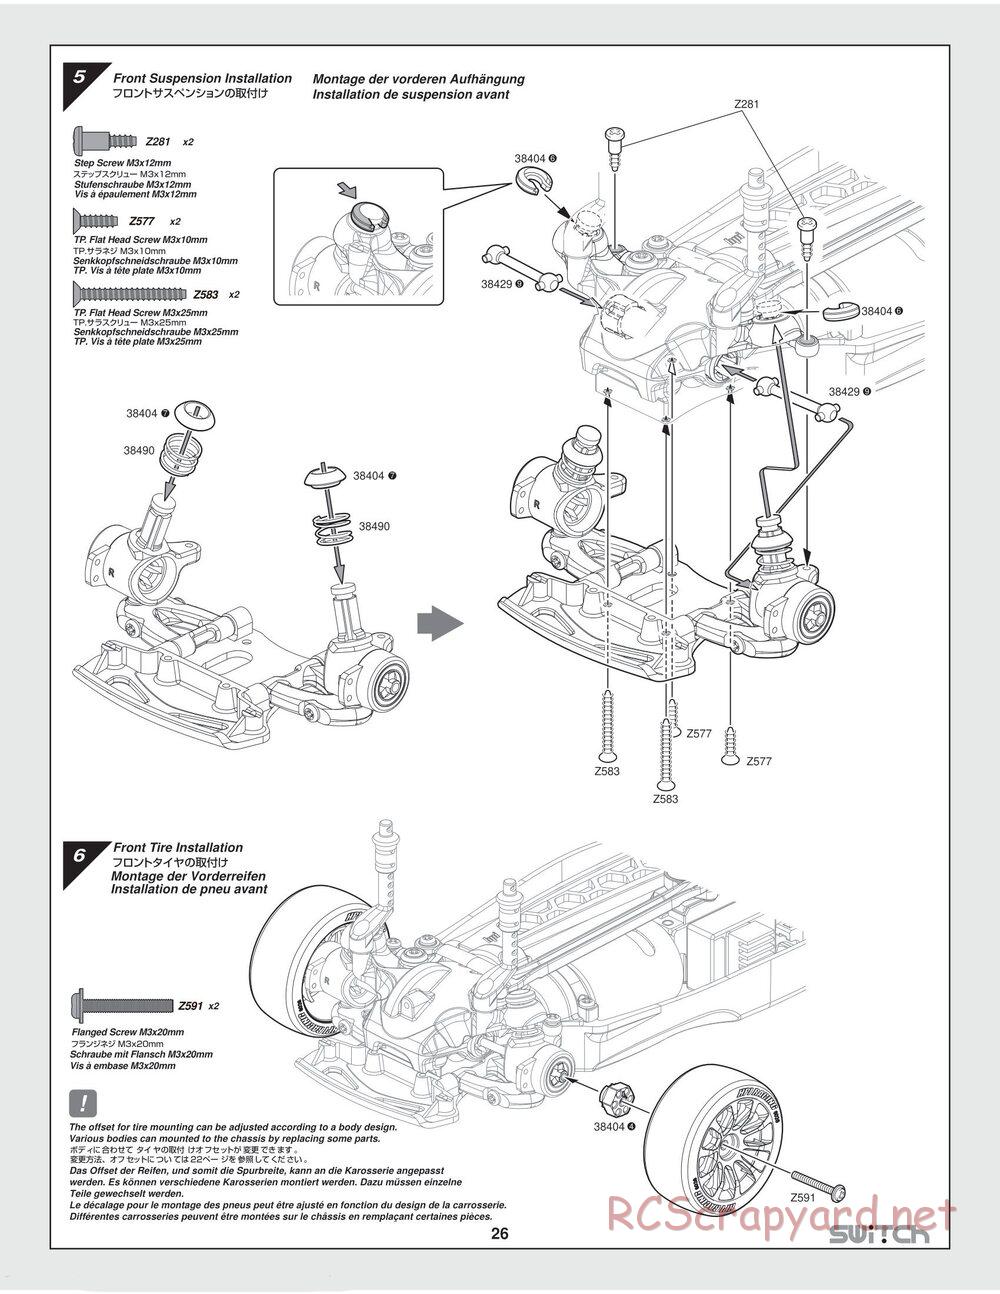 HPI - Switch - Manual - Page 26